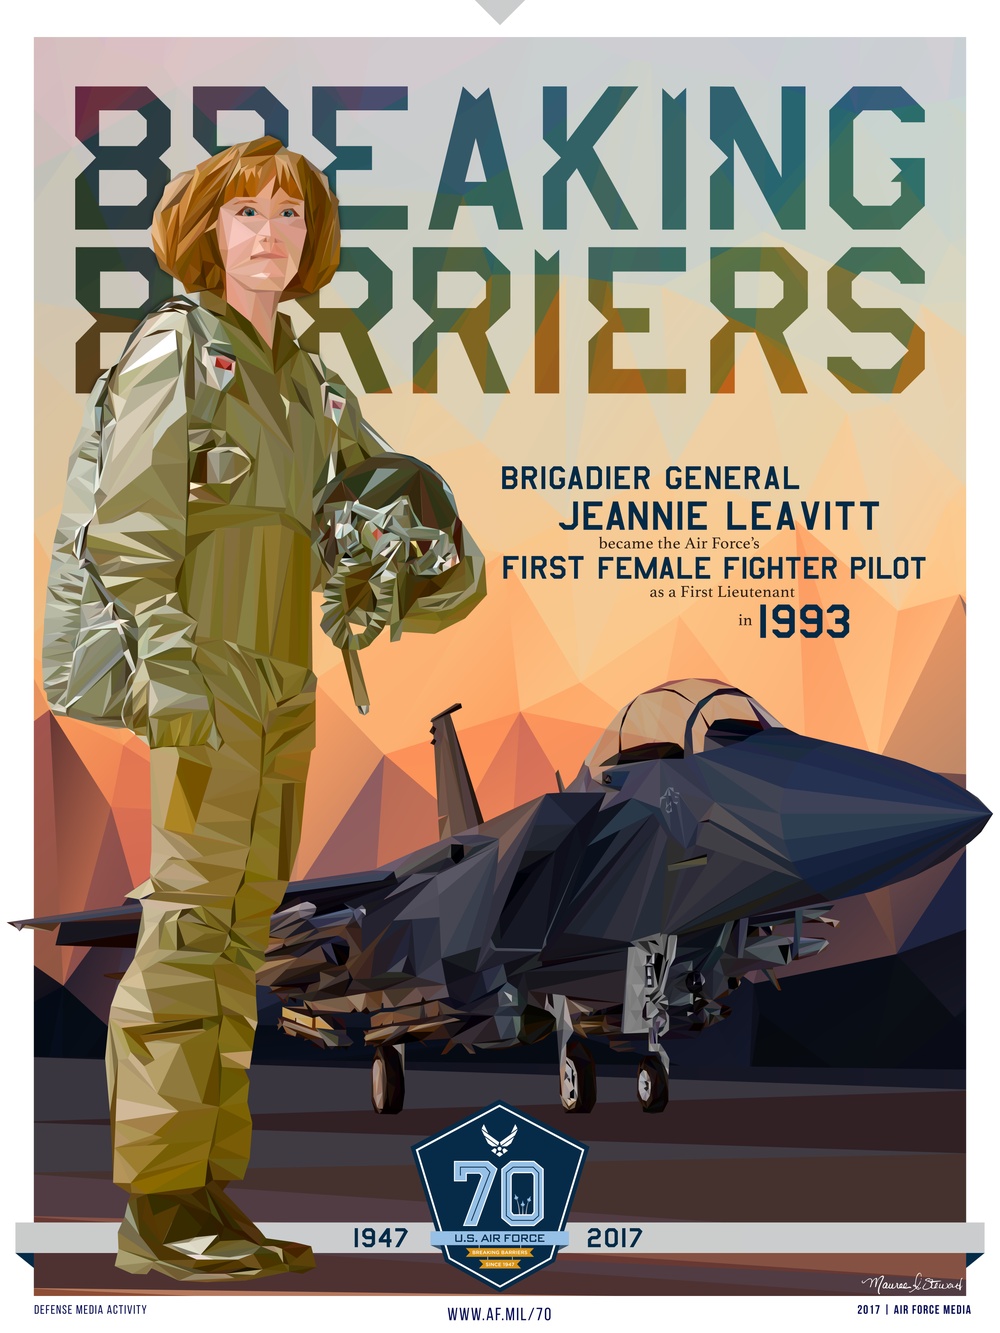 Breaking Barriers-First Female Fighter Pilot (6 of 8)